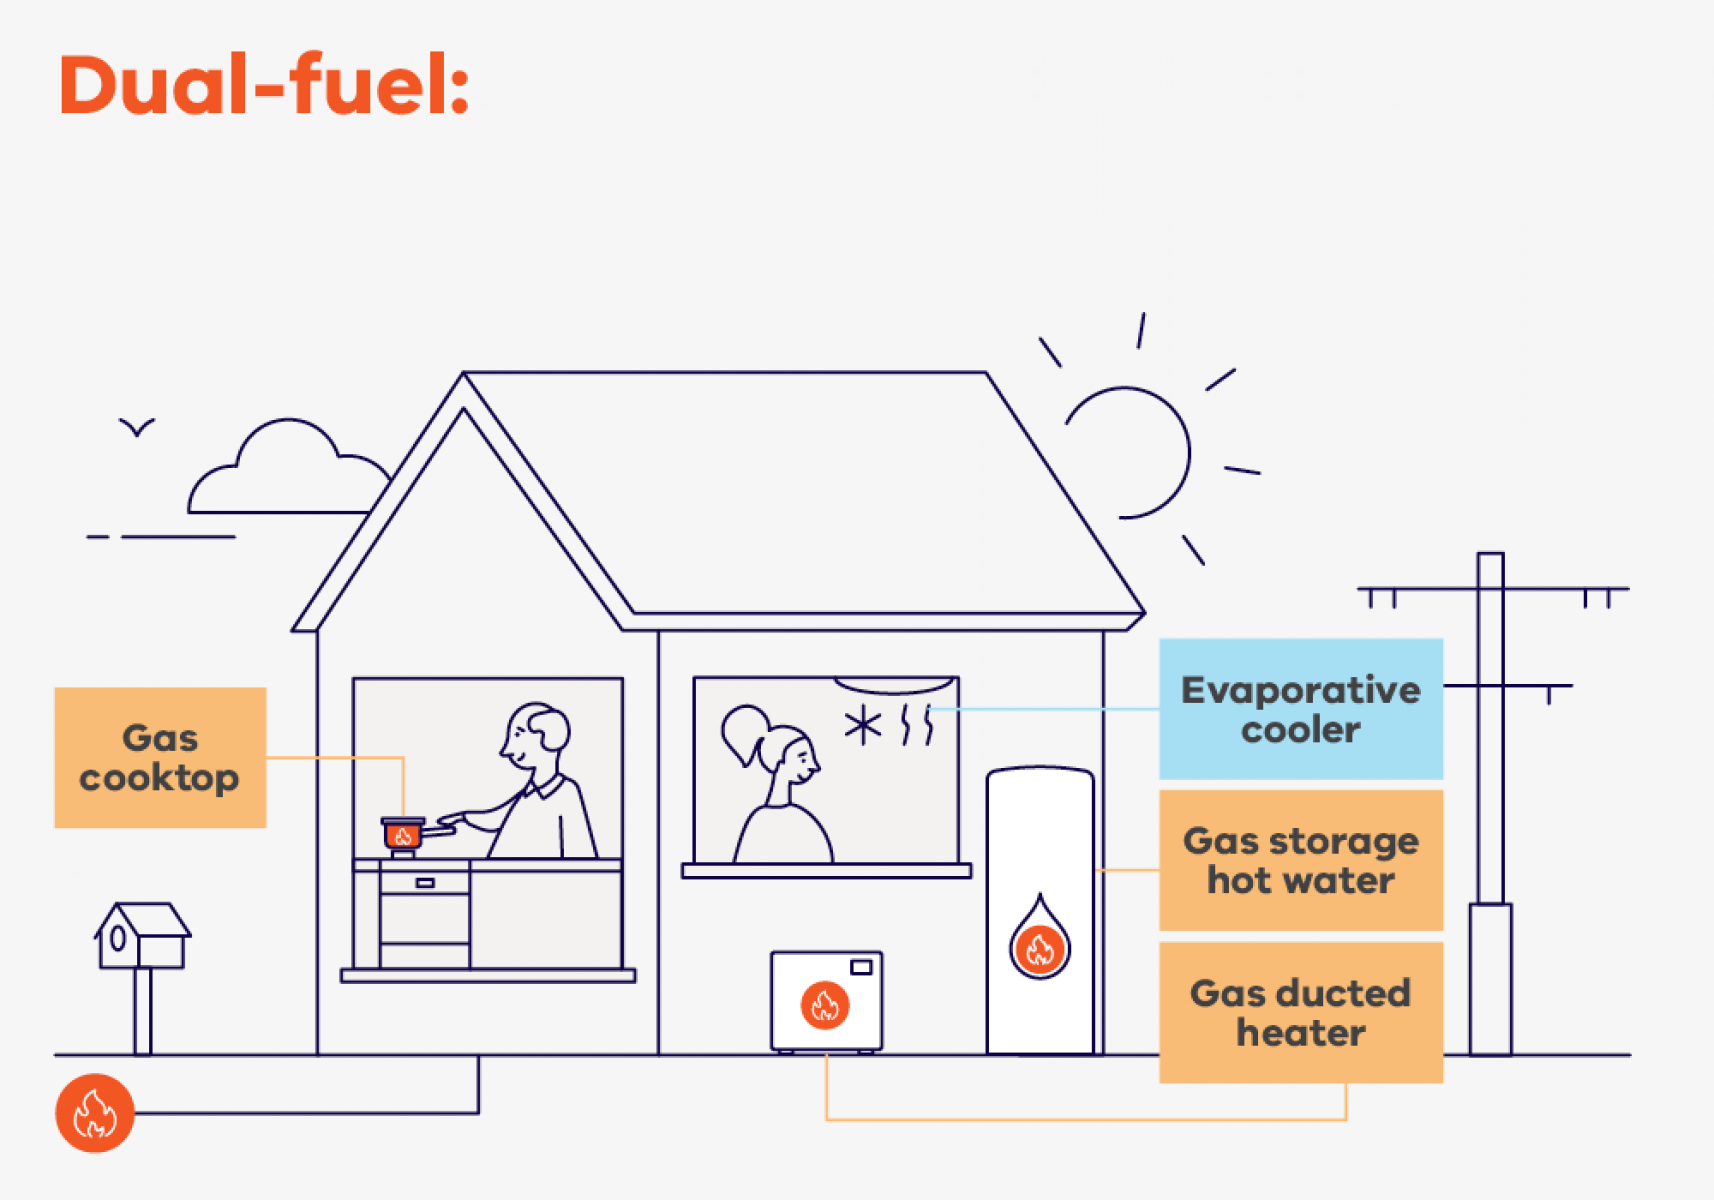 A home using gas and electricity as energy sources